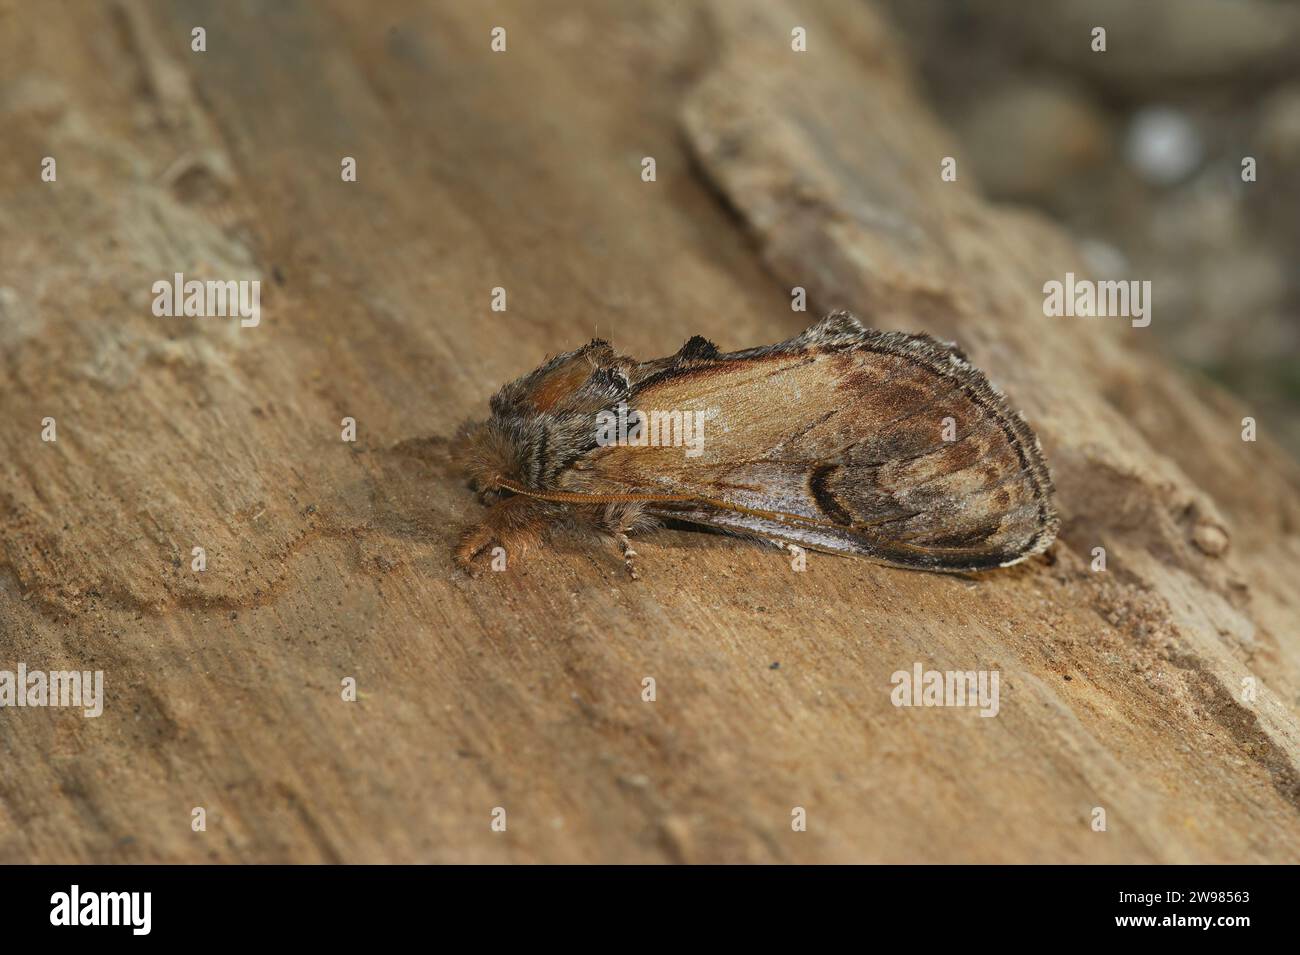 Natural closeup on the pebble prominent moth, Notodonta ziczac, sitting on wood Stock Photo